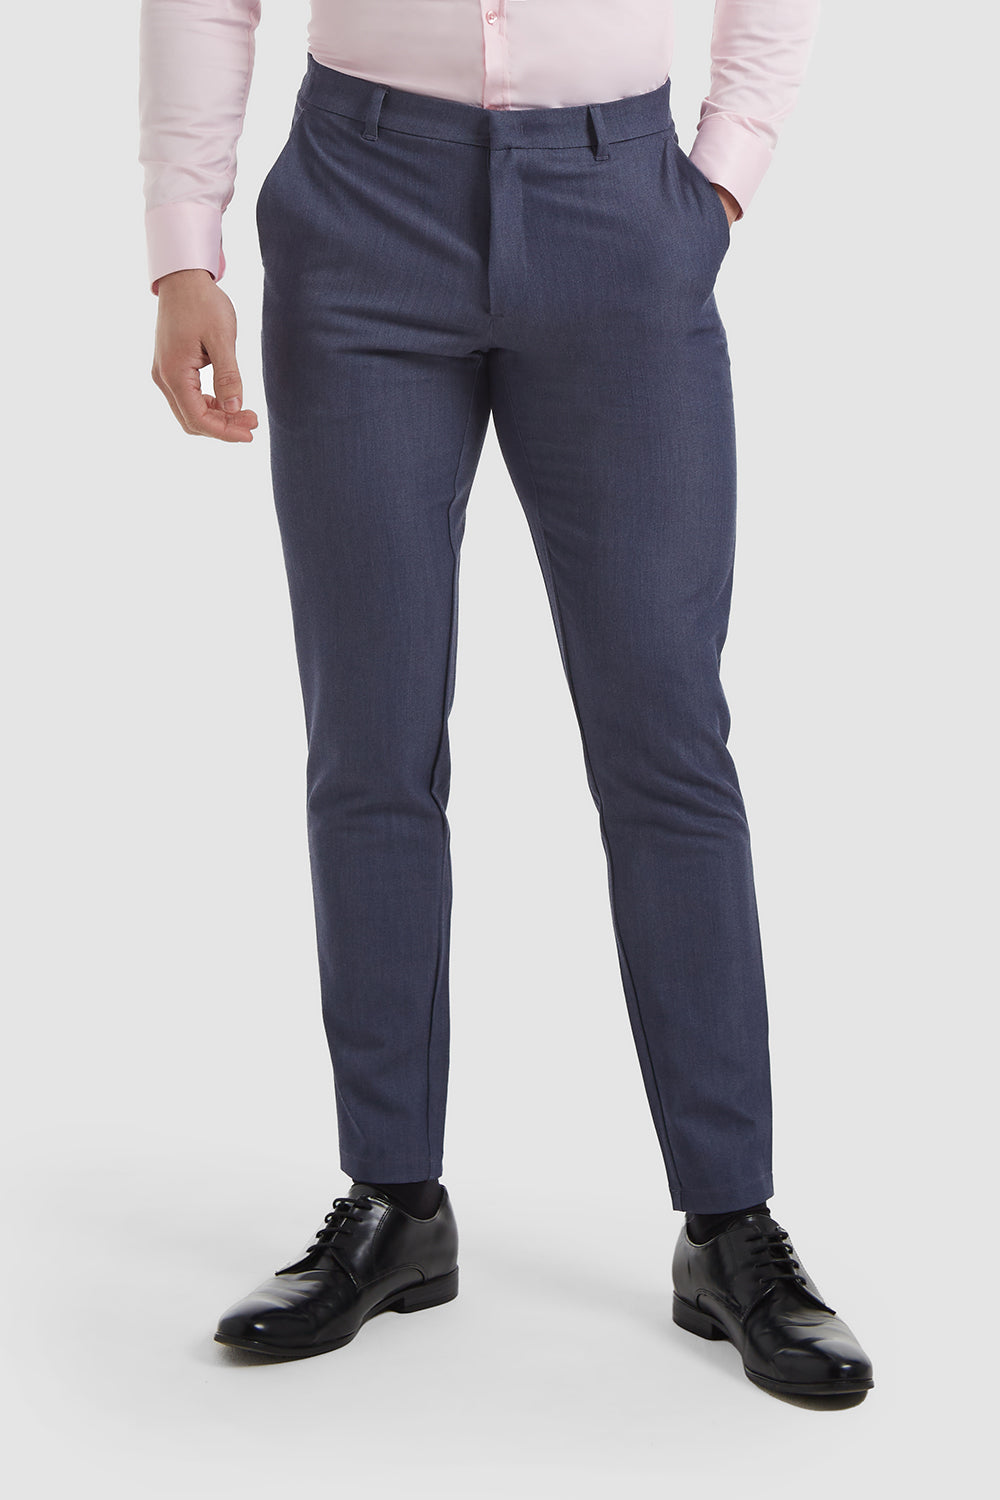 Muscle Fit Essential Trousers 2.0 in Chambray - TAILORED ATHLETE - ROW